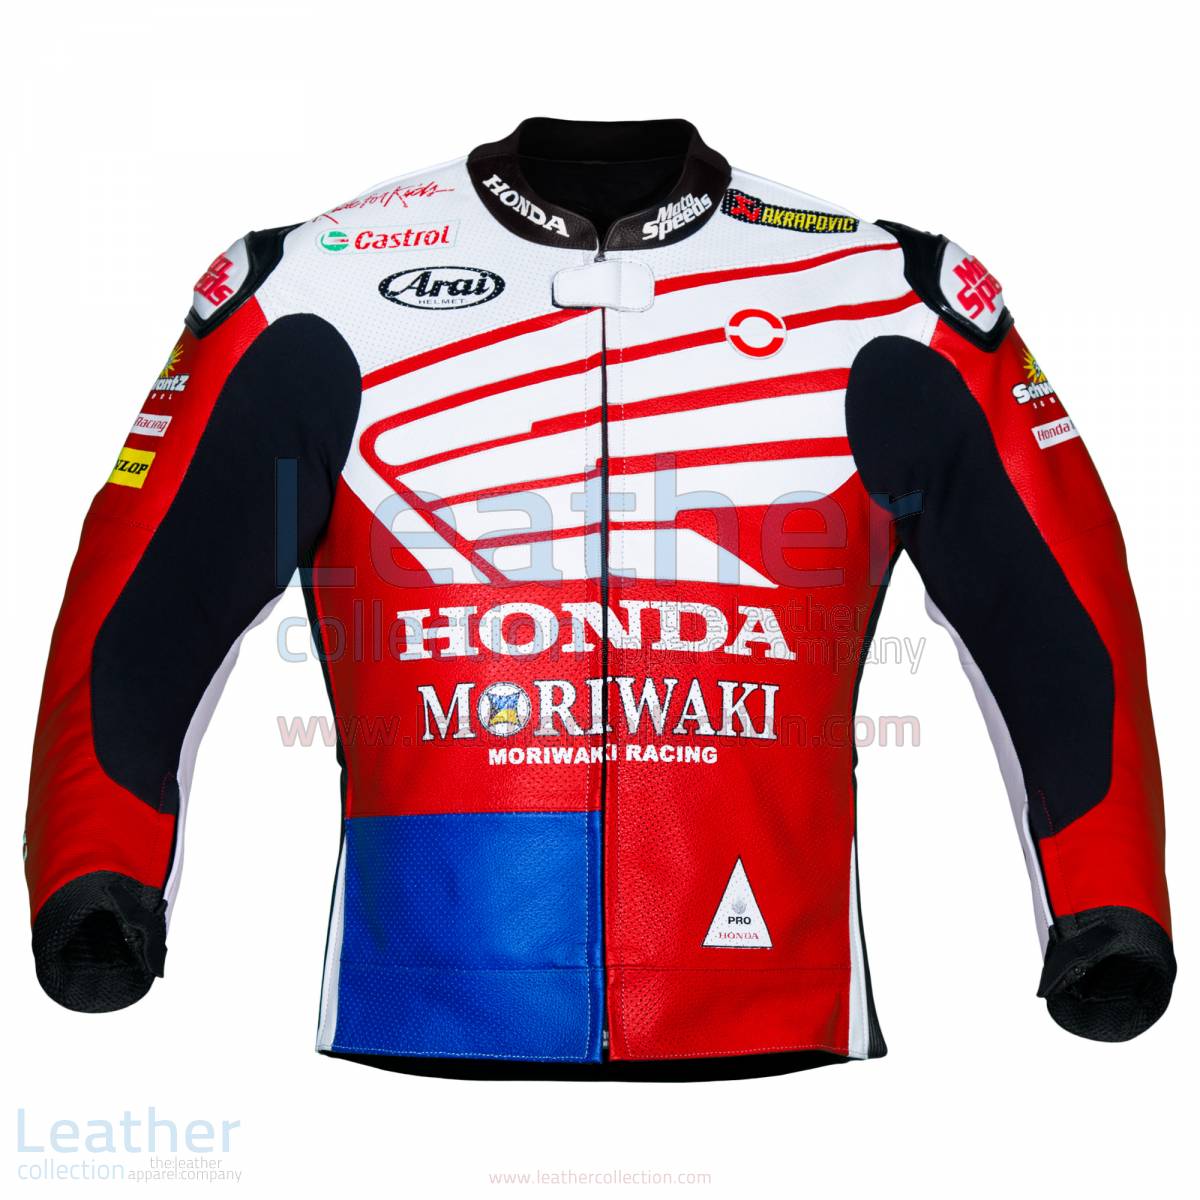 mens red leather motorcycle jacket